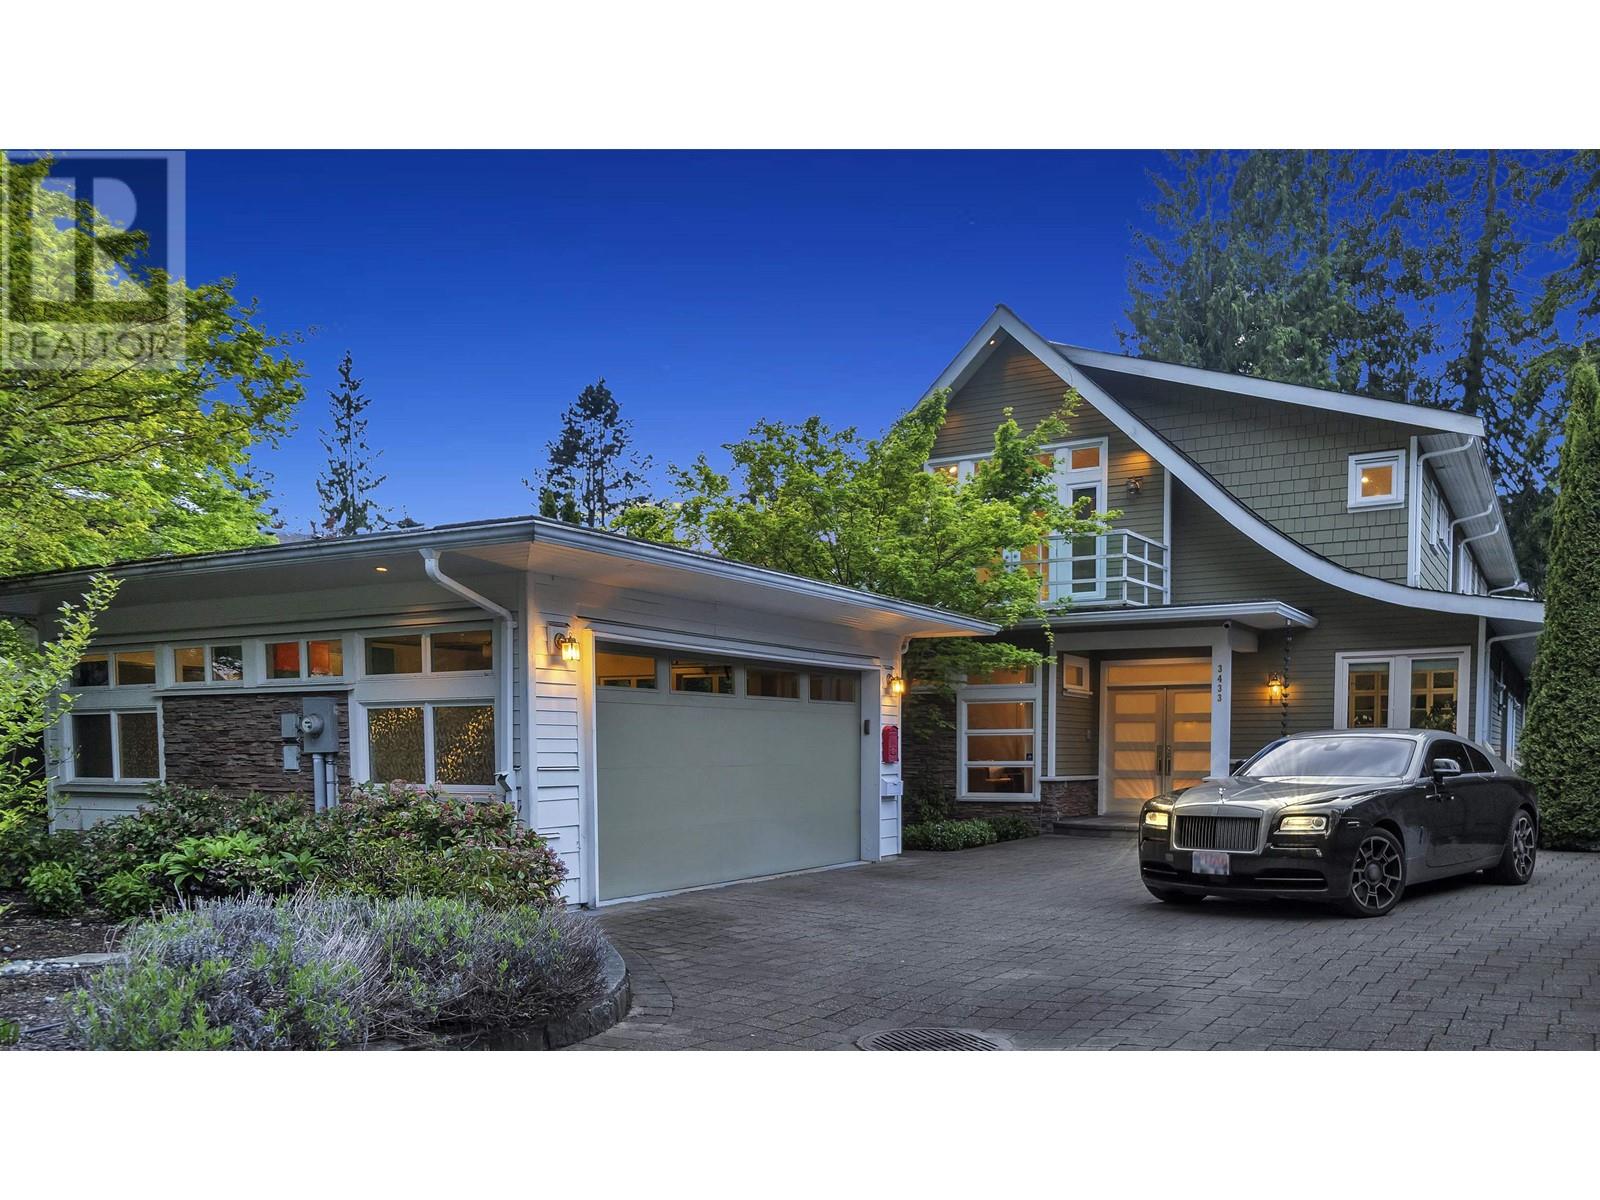 3433 NORCROSS WAY located in North Vancouver, British Columbia